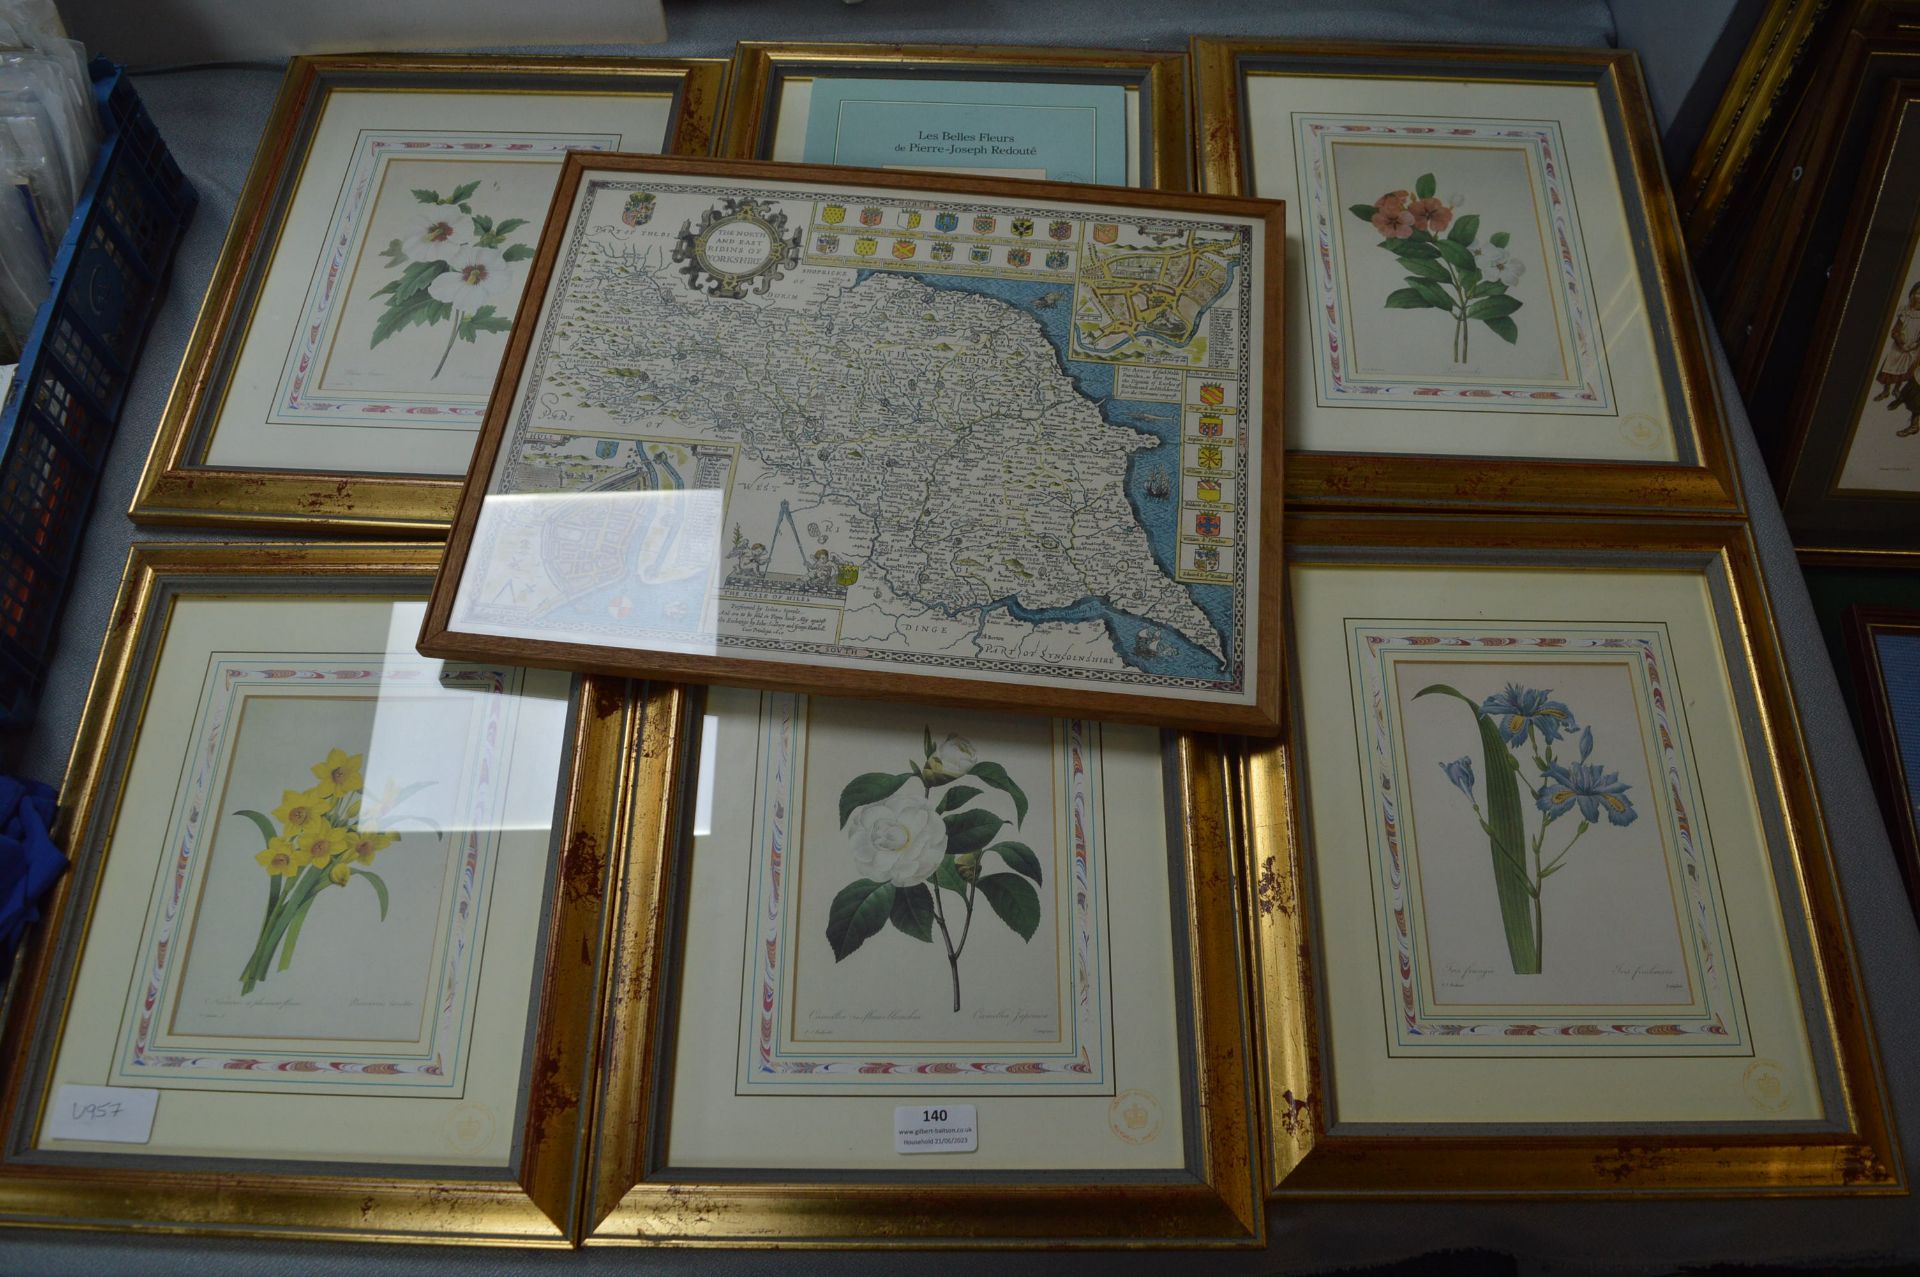 Six Framed Redoute Flower Prints, and a map of Yor